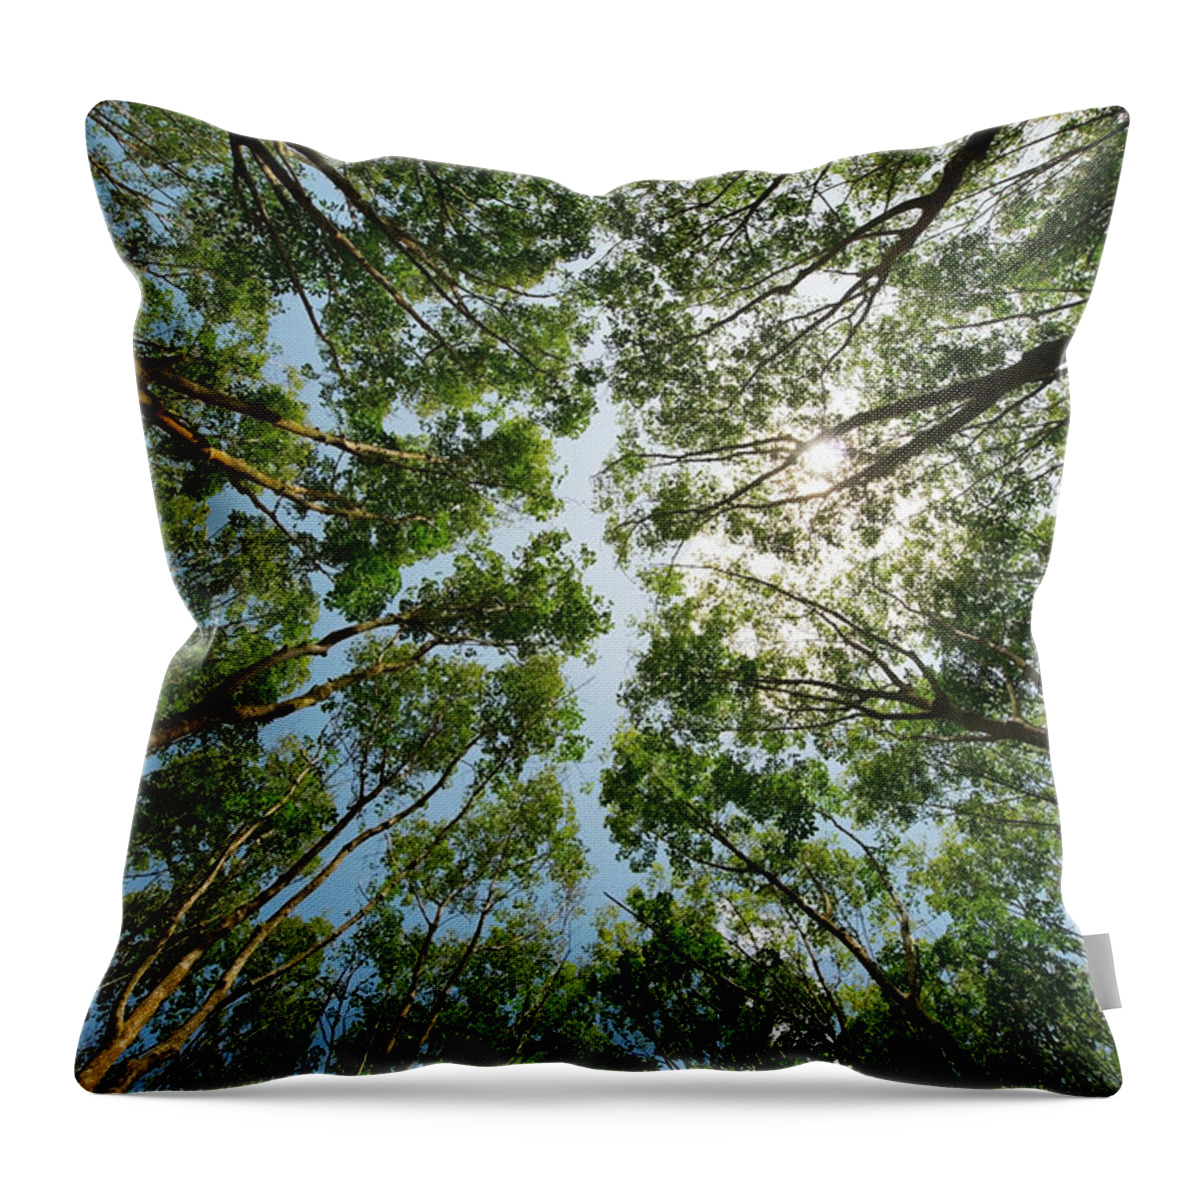 Directly Below Throw Pillow featuring the photograph Low Angle View Of The Tops Of Rubber by Stuart Corlett / Design Pics